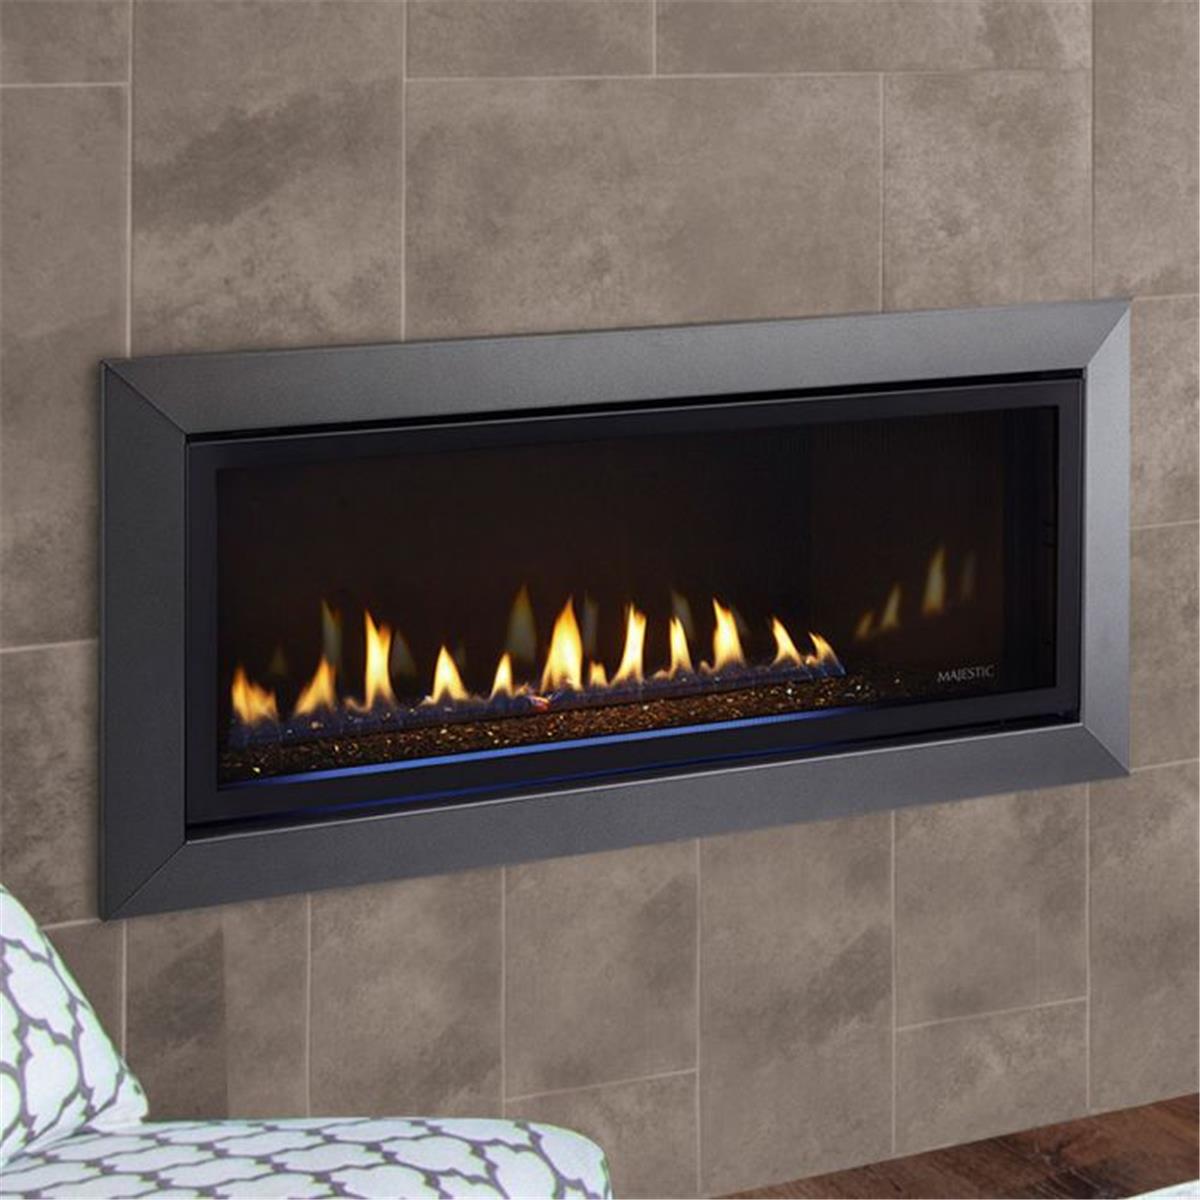 Majestic JADE42IN-B 42 in. Jade Direct Vent Gas Fireplace with Intellifire Touch Ignition System -  Majestic Pet Products